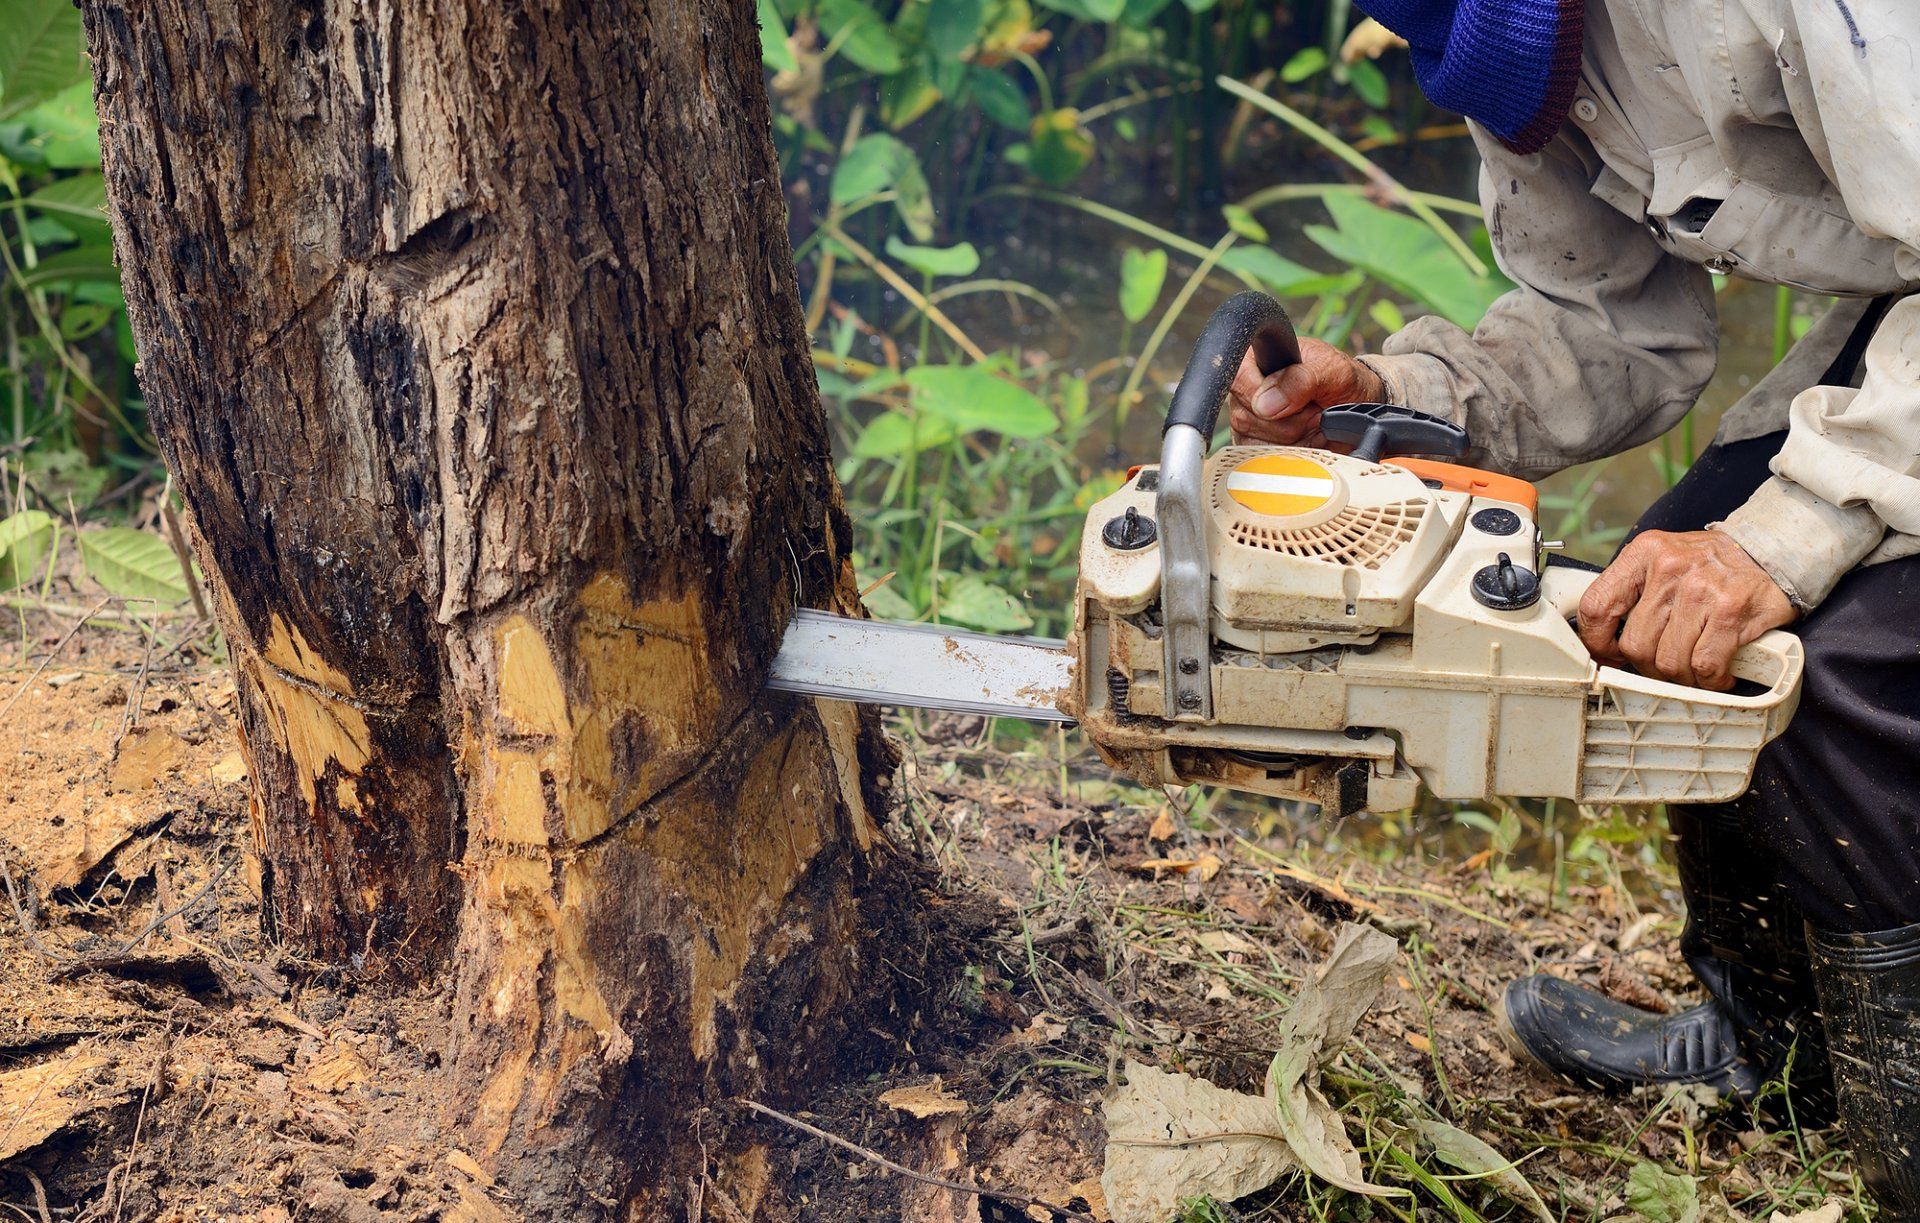 Emergency Tree Removal Services in East Greenbush, NY | N E Tree and Property Services LLC